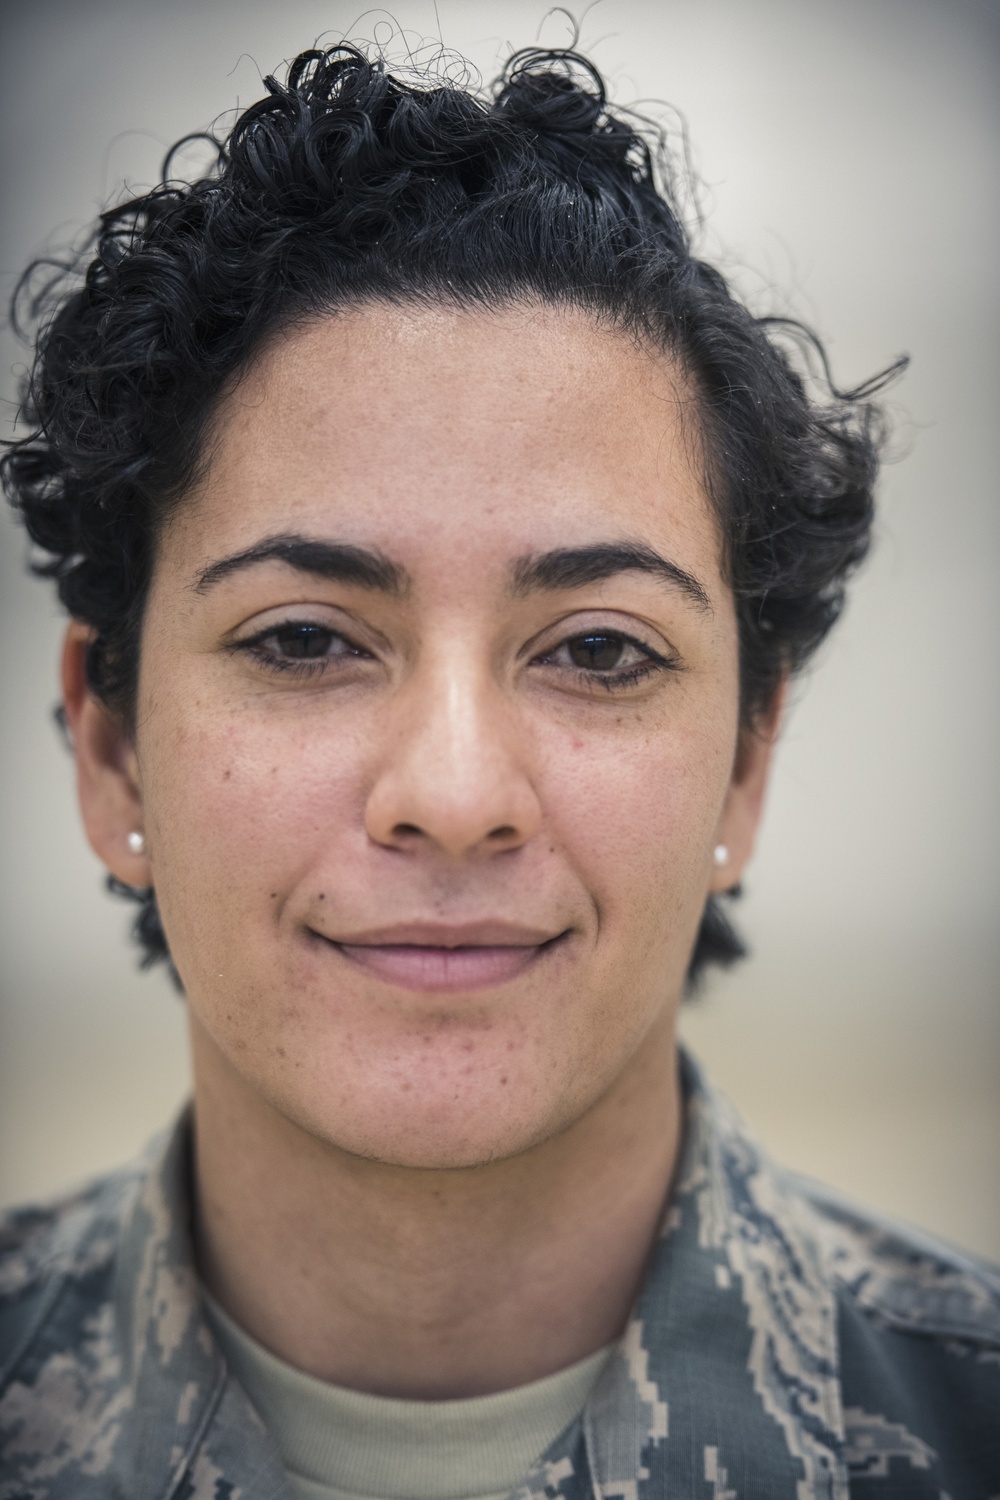 Staff Sgt. Marcee Lettinga: &quot;Family Vibe&quot; defines service in Michigan Air National Guard